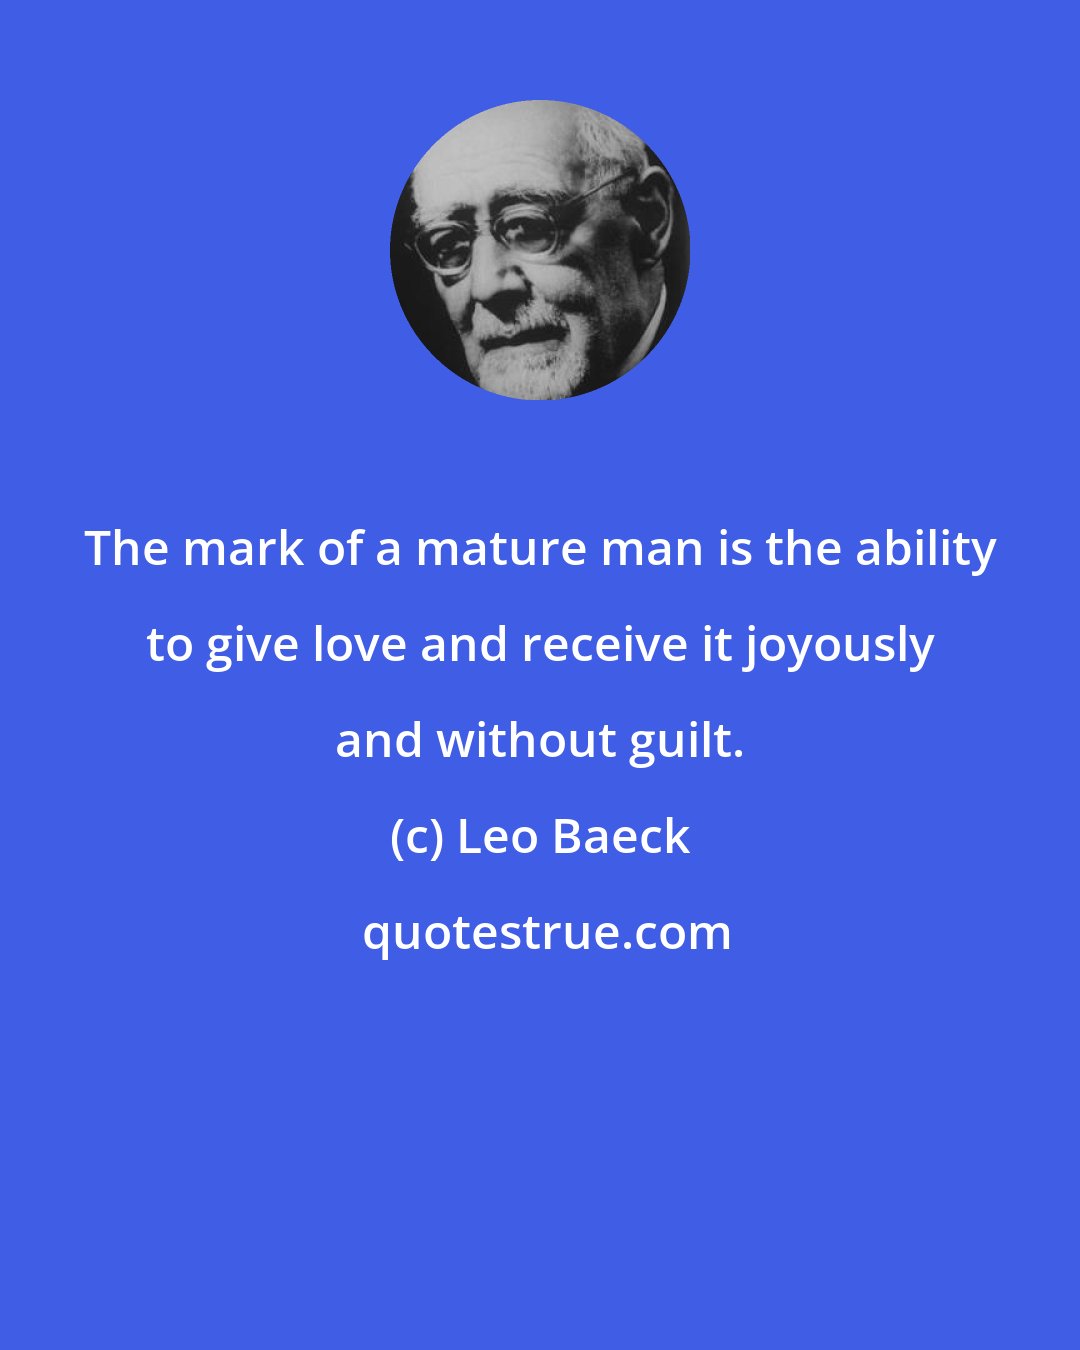 Leo Baeck: The mark of a mature man is the ability to give love and receive it joyously and without guilt.